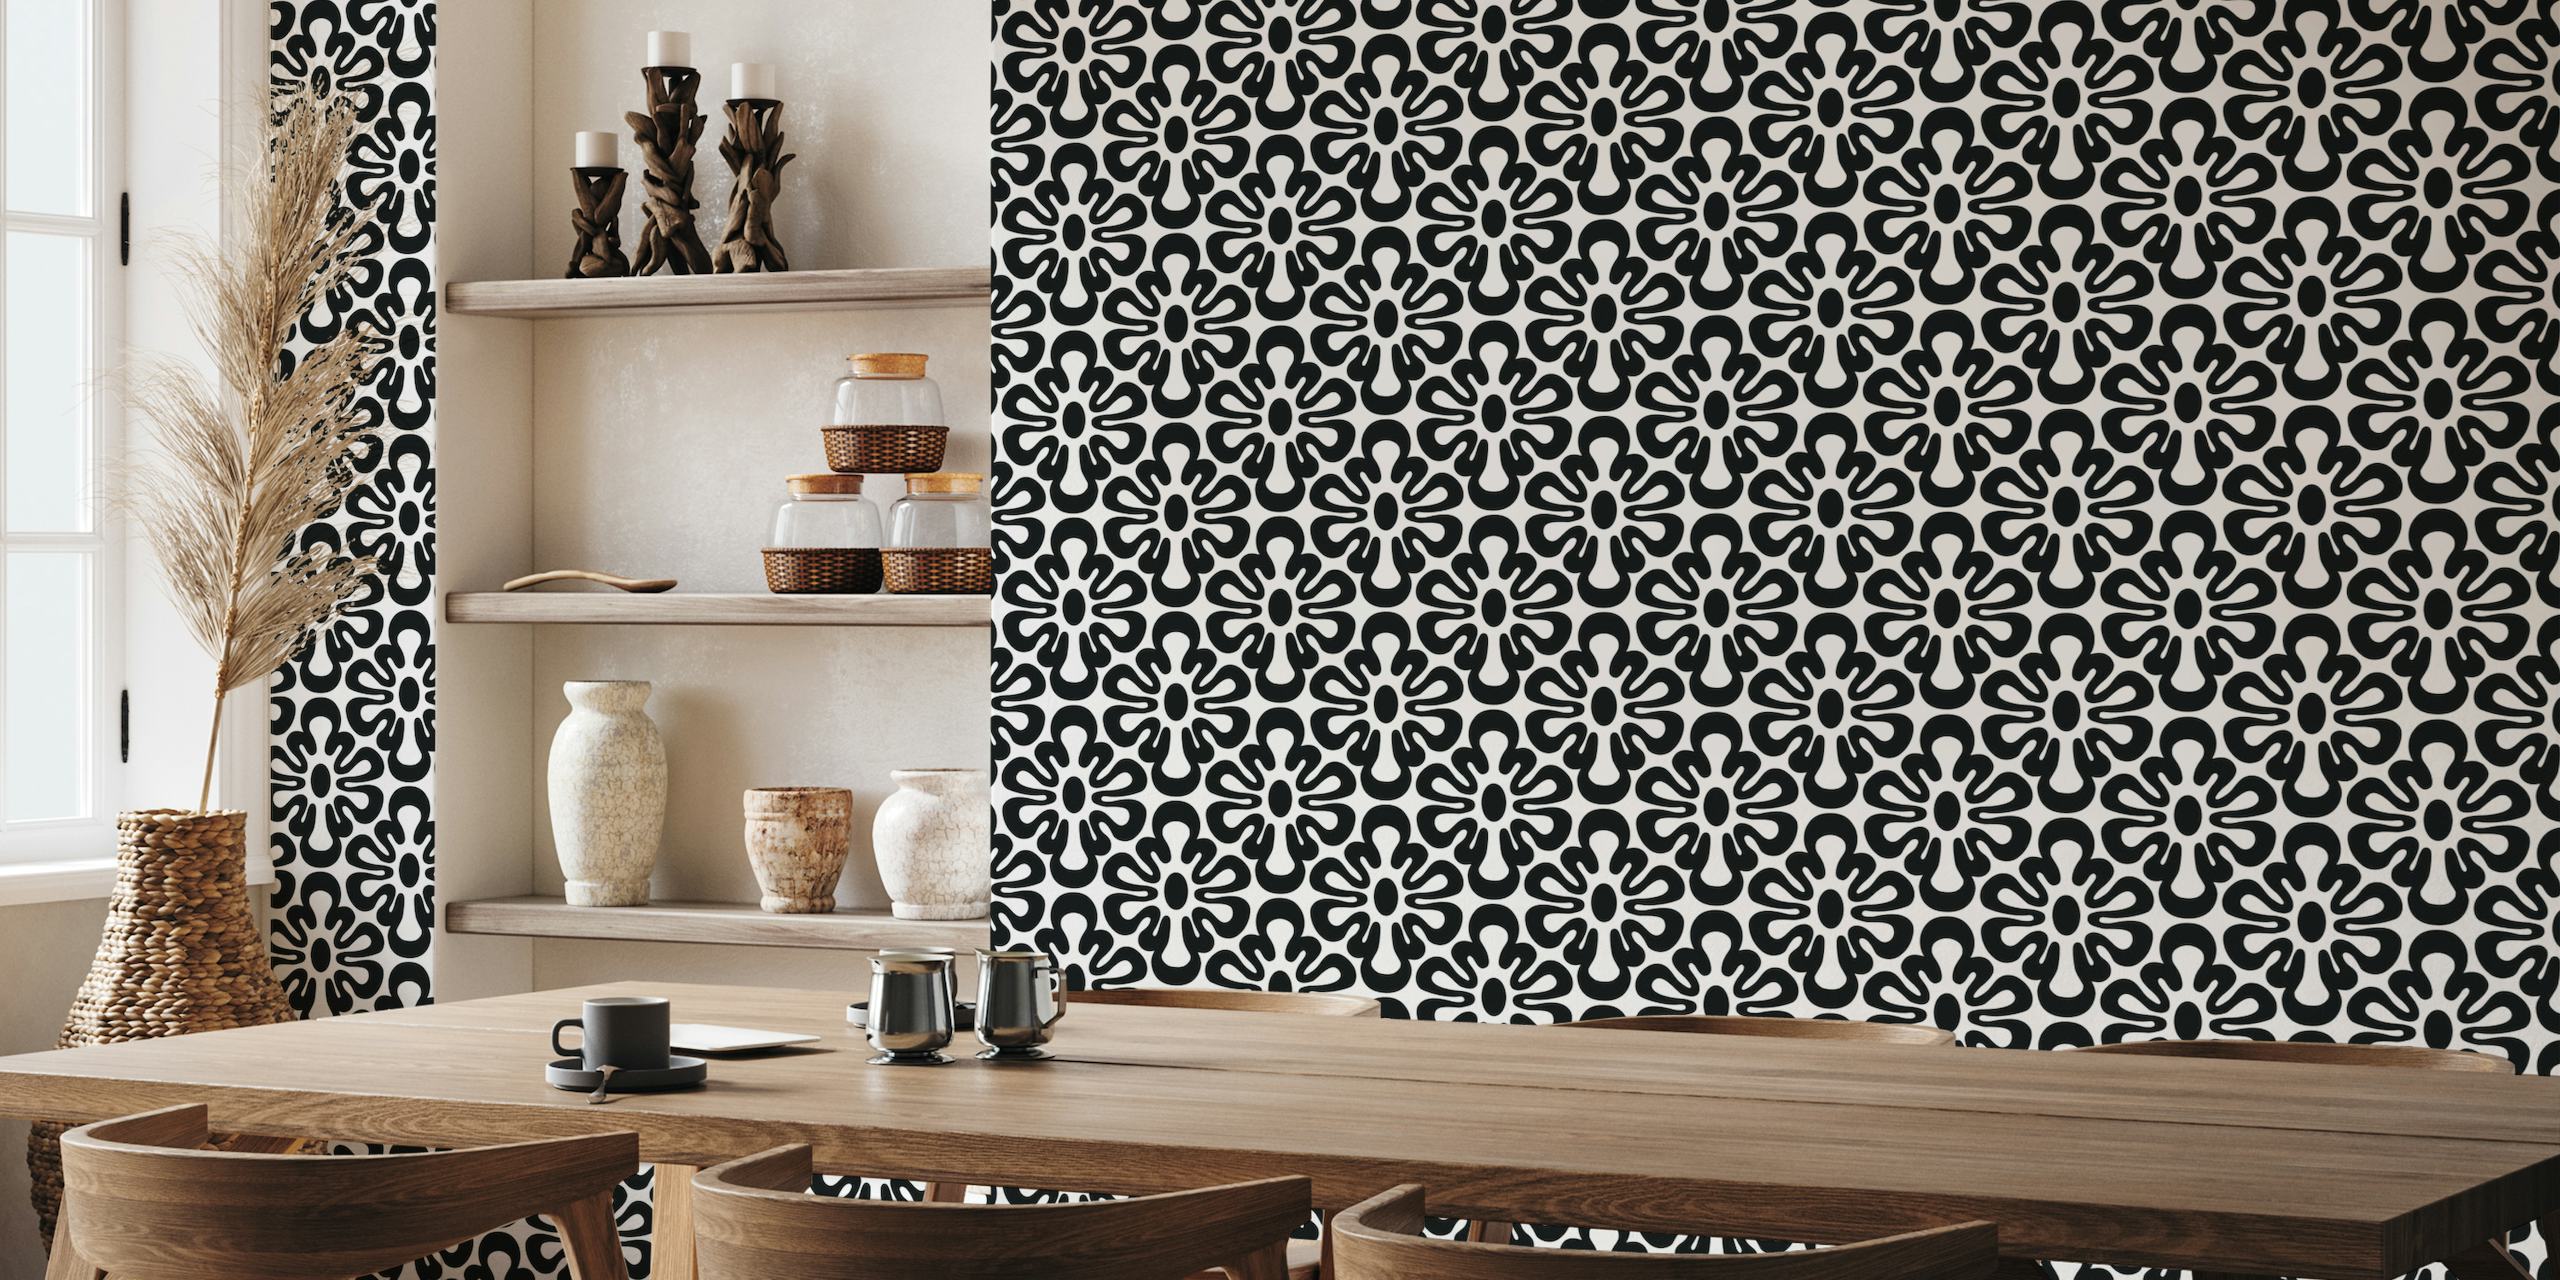 2625 D - abstract shapes pattern, black and white carta da parati